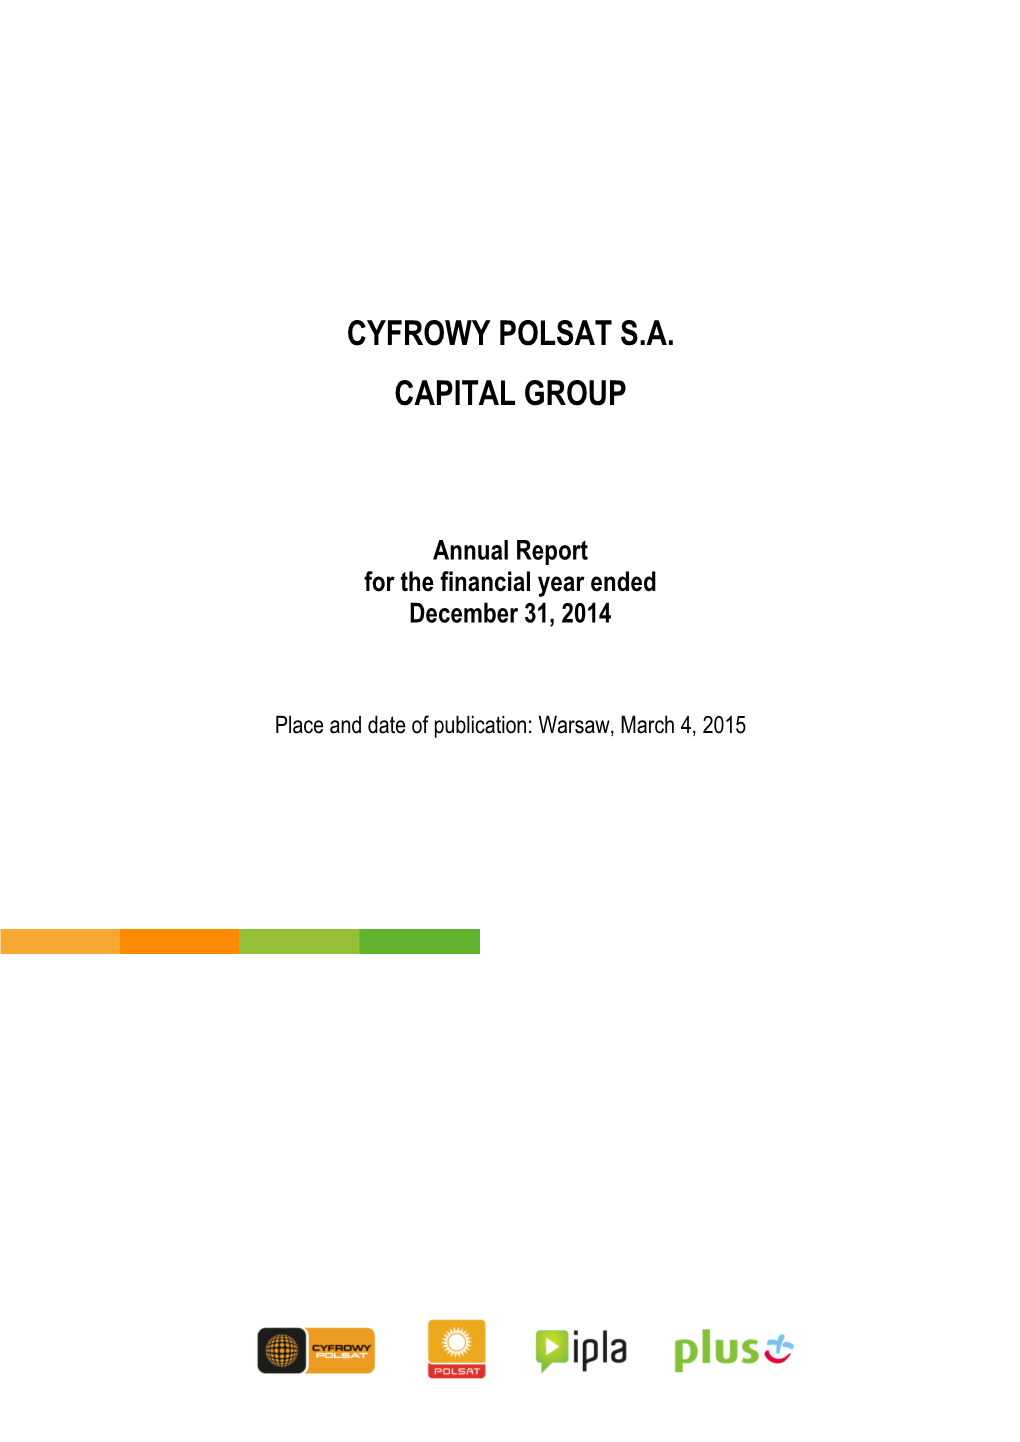 Annual Report for the Financial Year Ended December 31, 2014